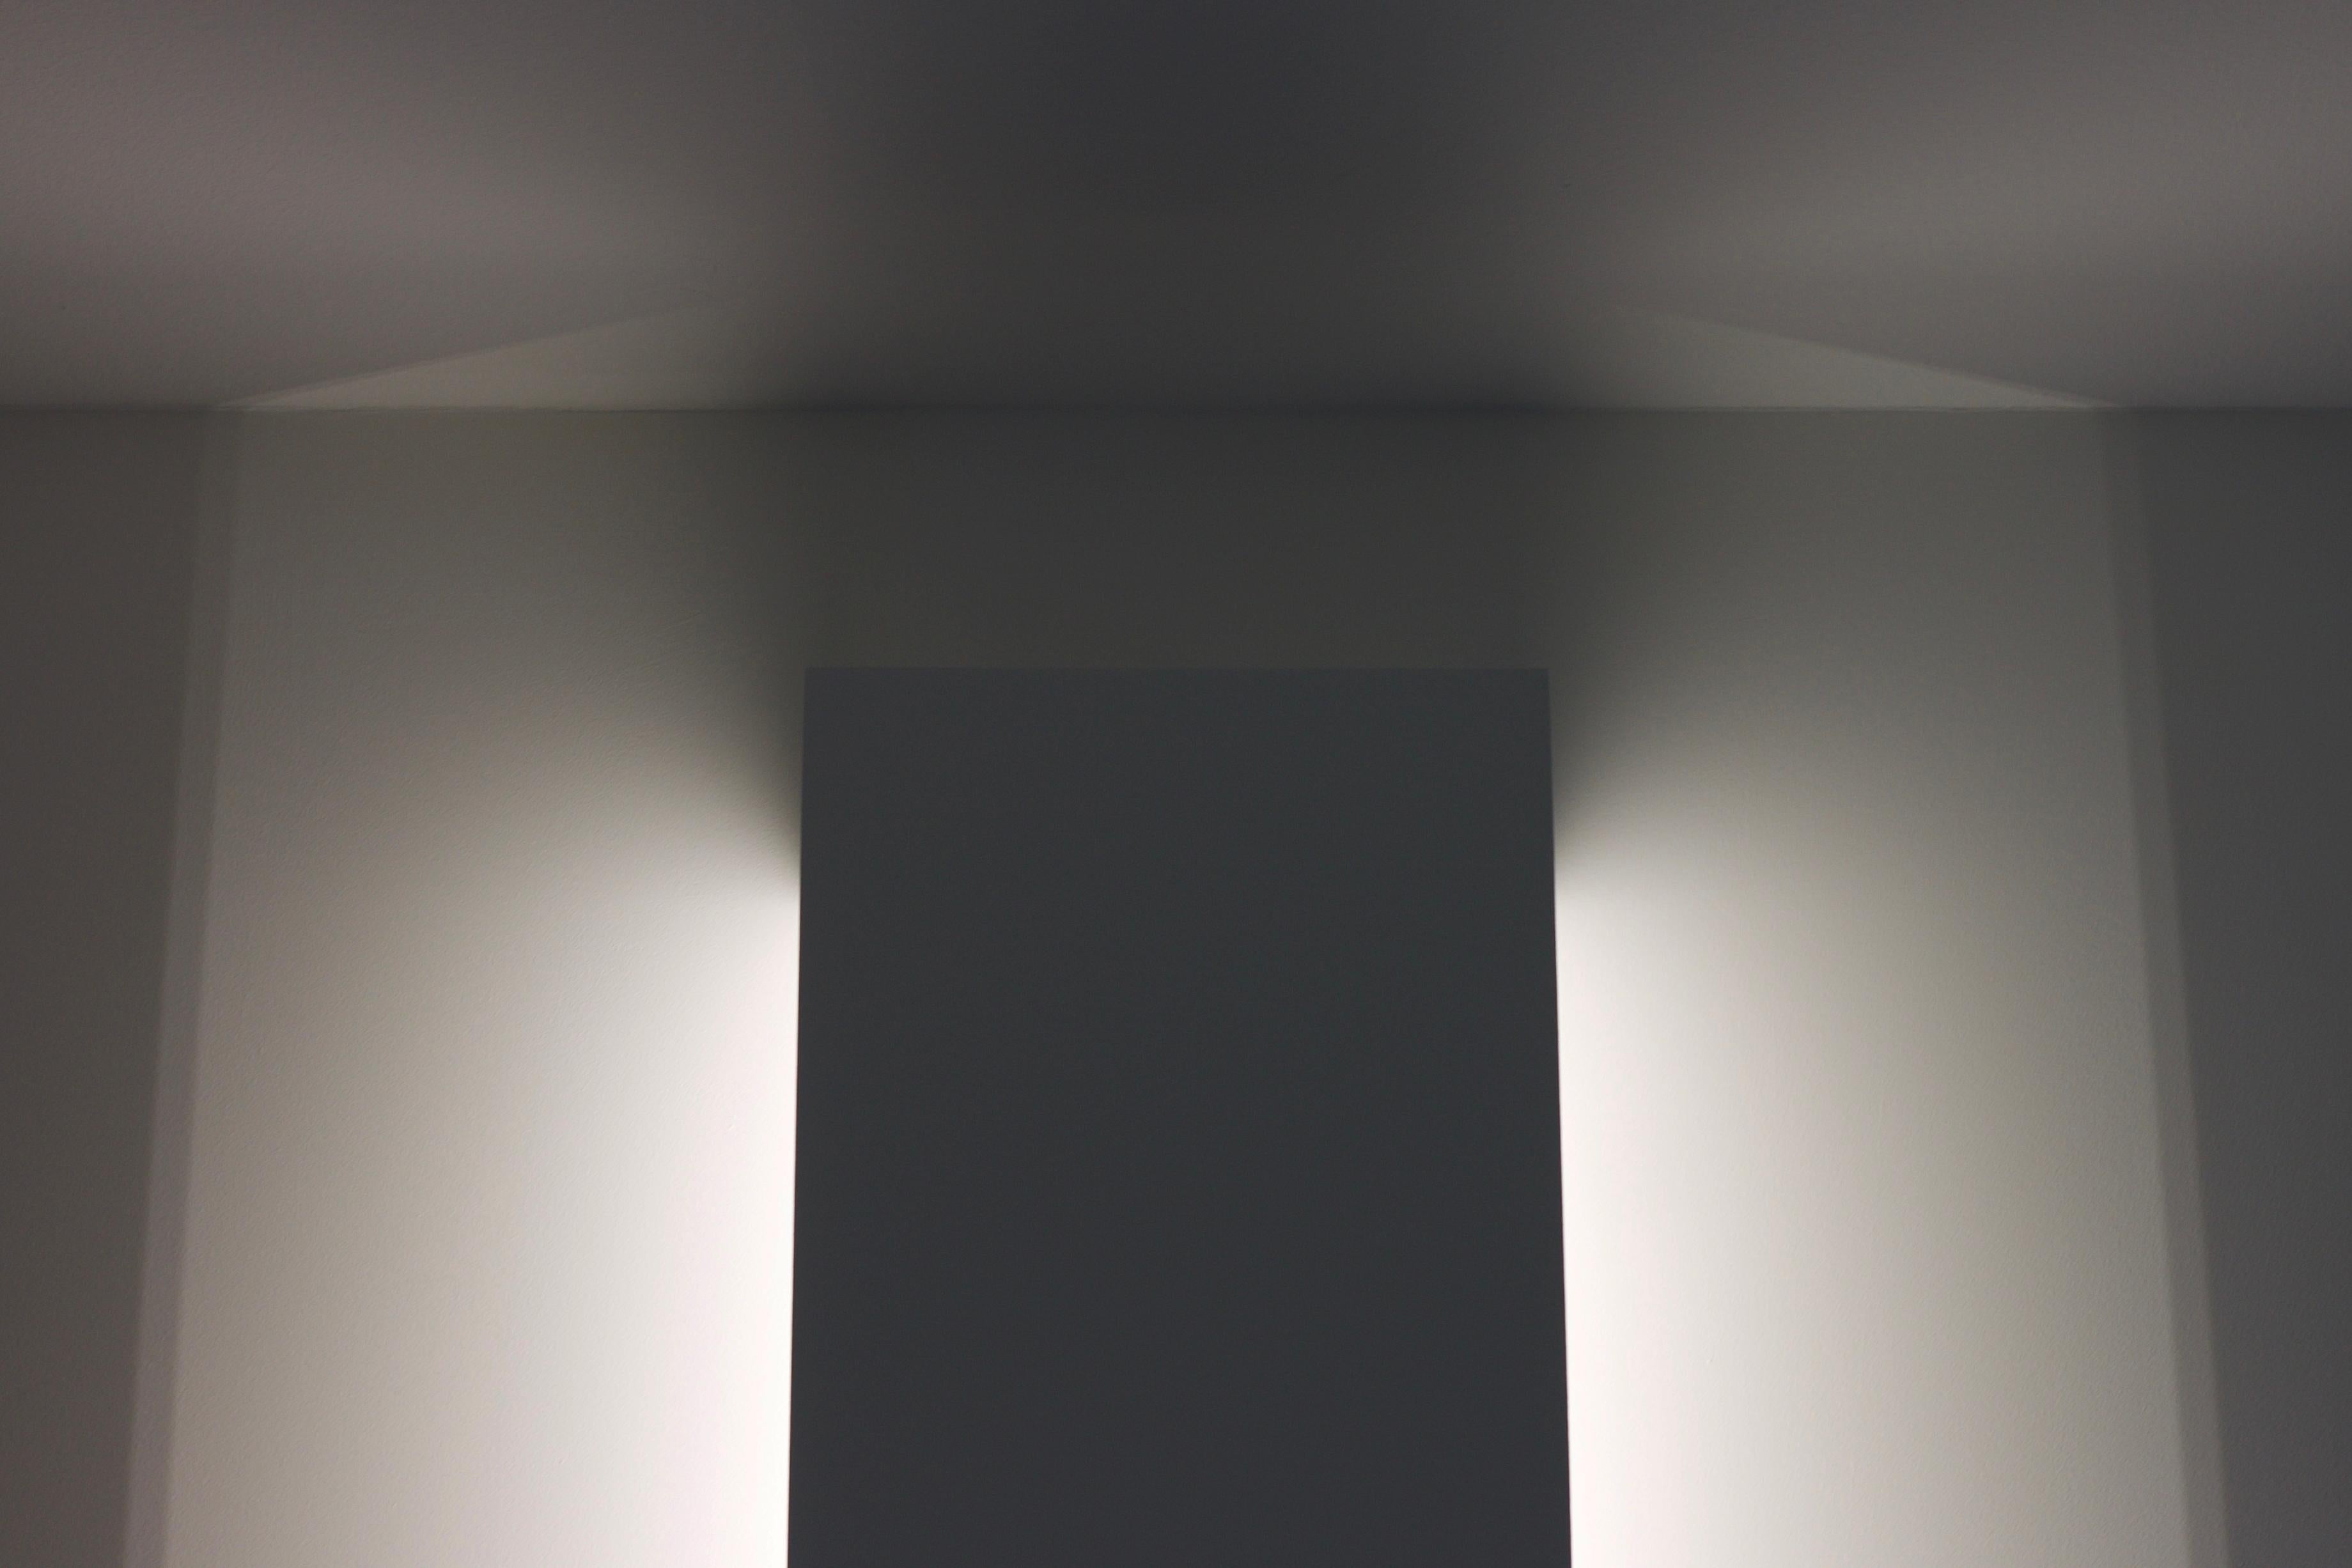 Labyrinth Light Extreme Minimalist Floor Vertical Led Wall Lamp In New Condition For Sale In monza, Monza and Brianza